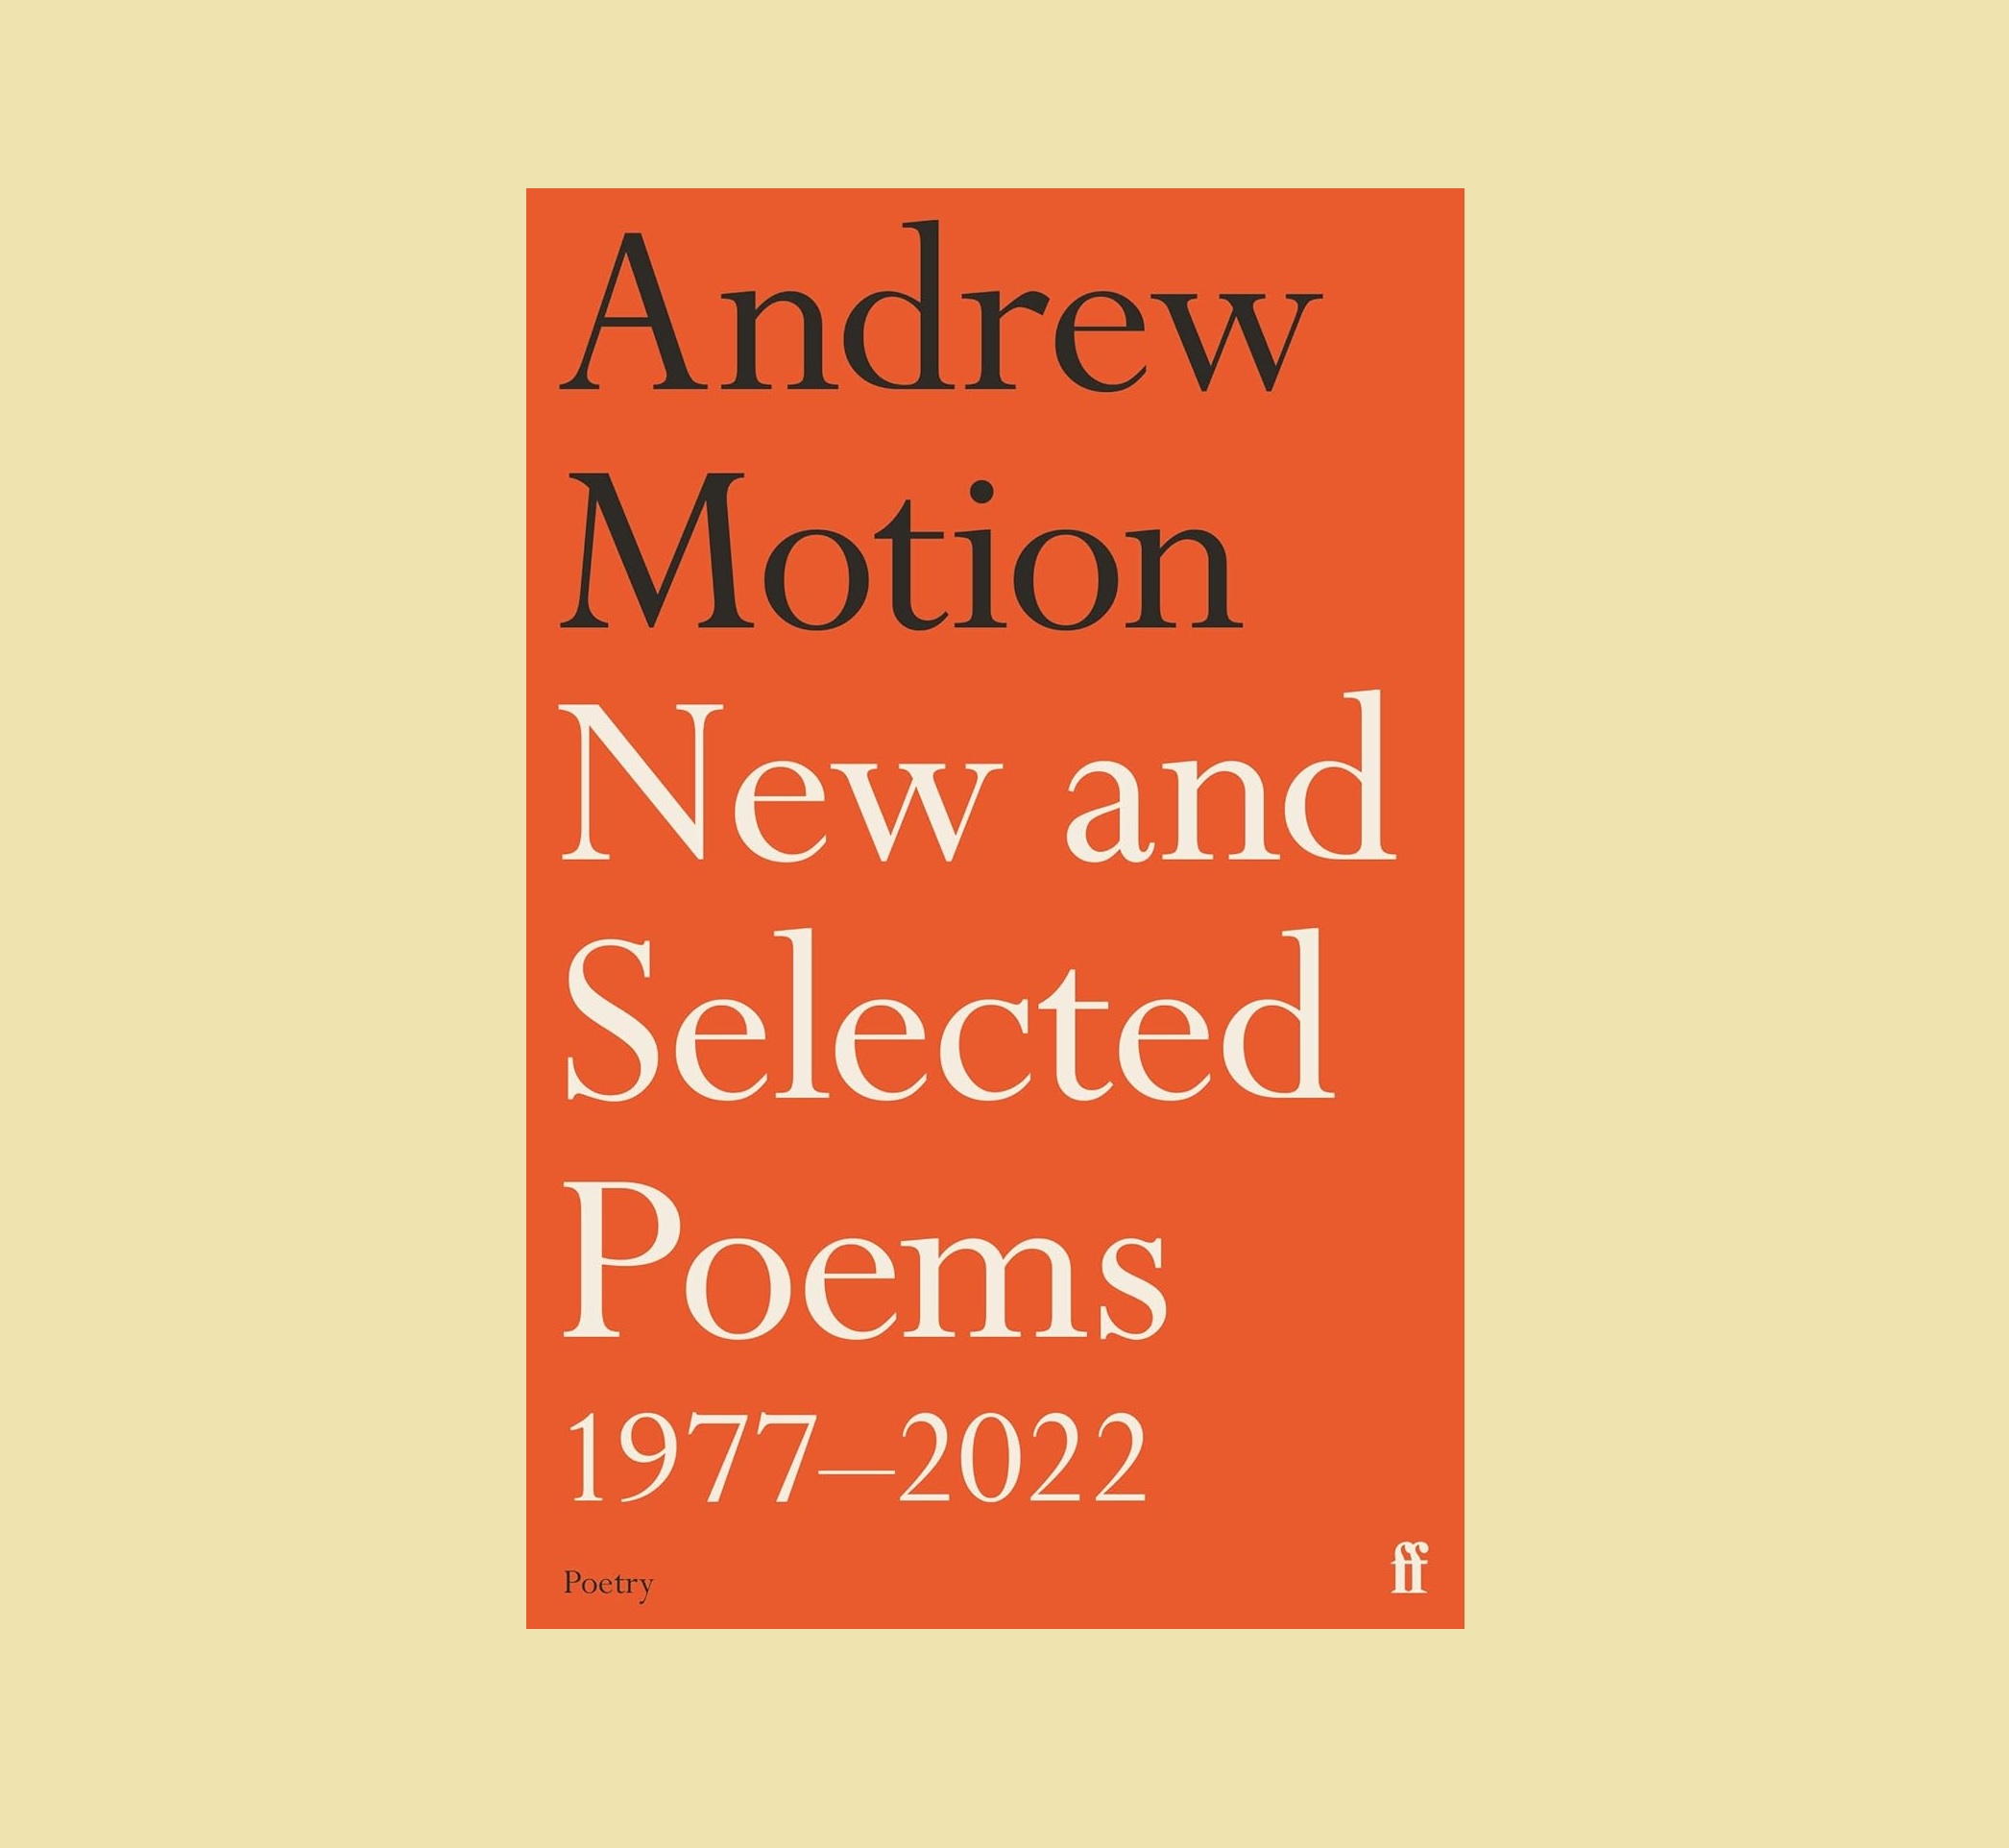 Wisdom joined with simplicity: on Andrew Motion’s New & Selected